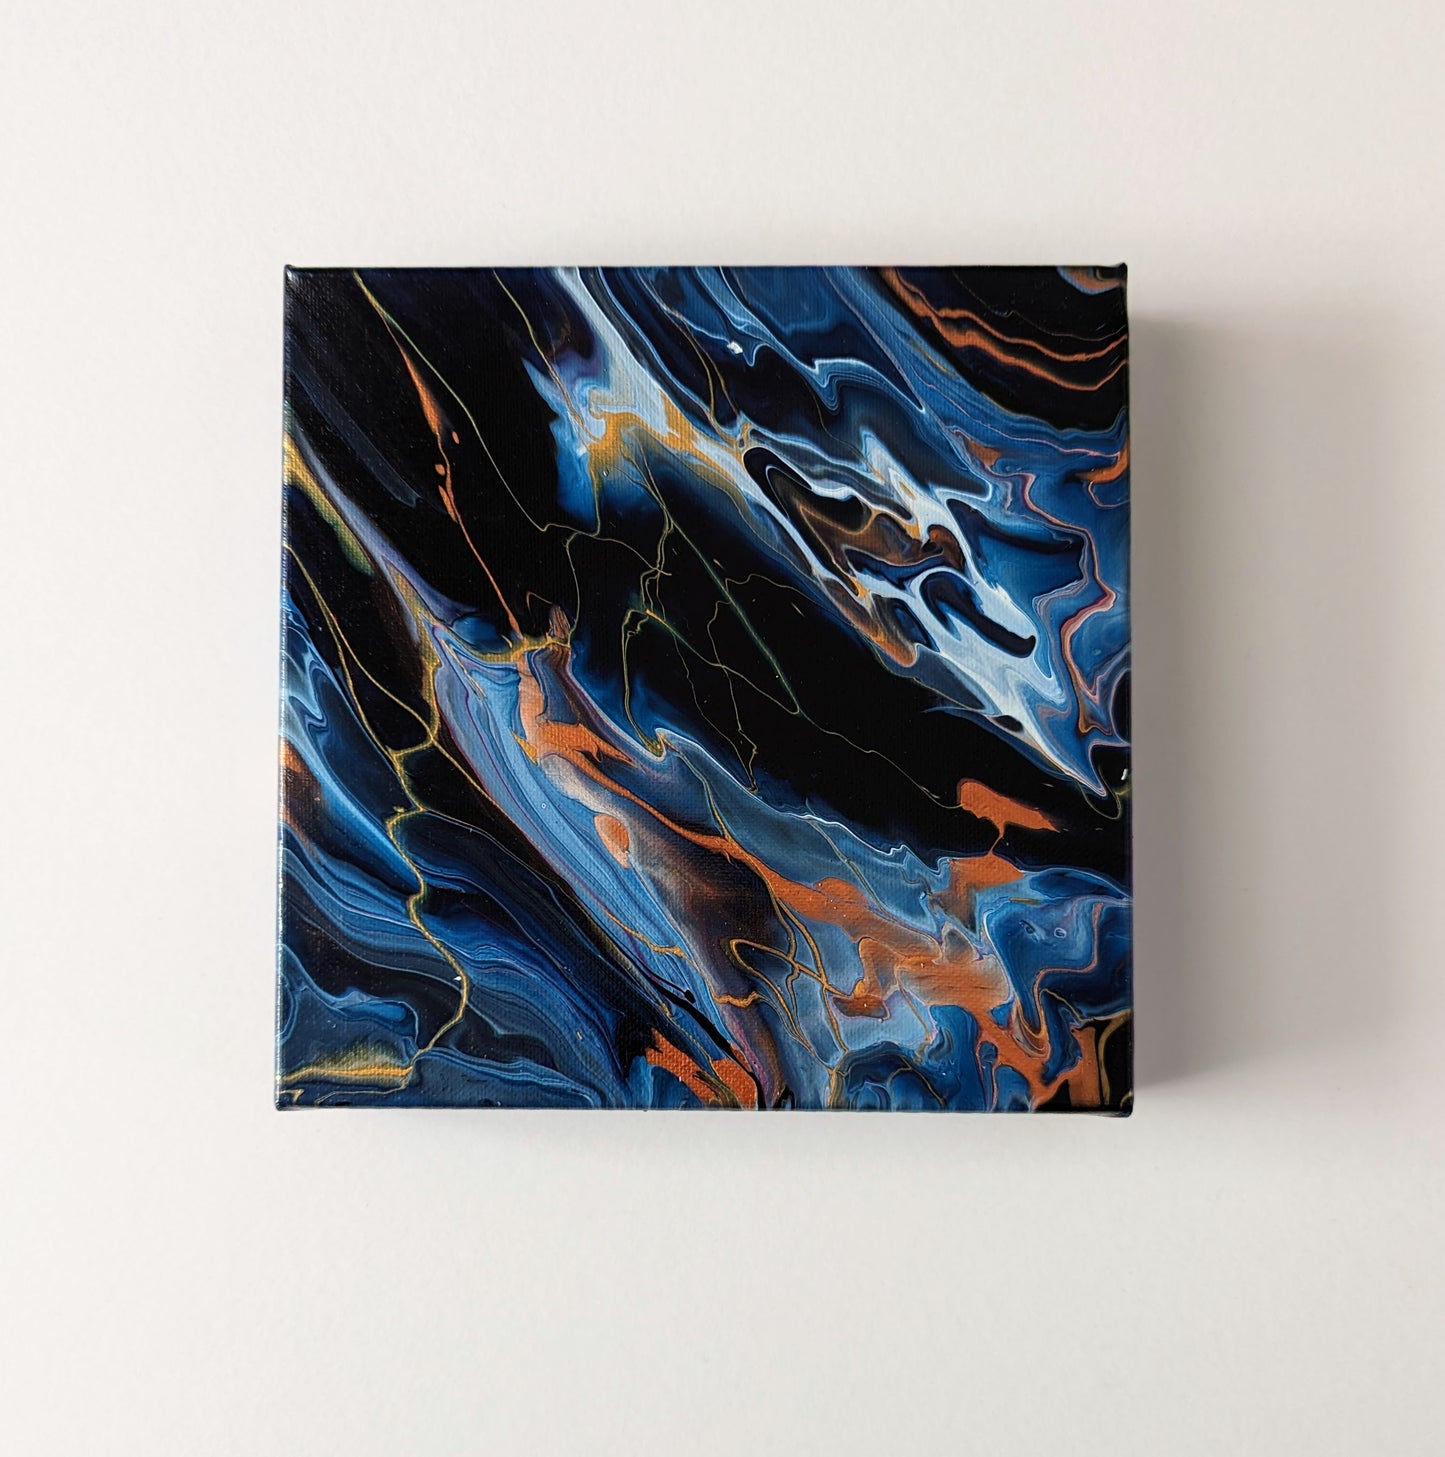 Canvas on wall – frontal view of original abstract painting made with Prussian blue and gold professional grade acrylic paint.